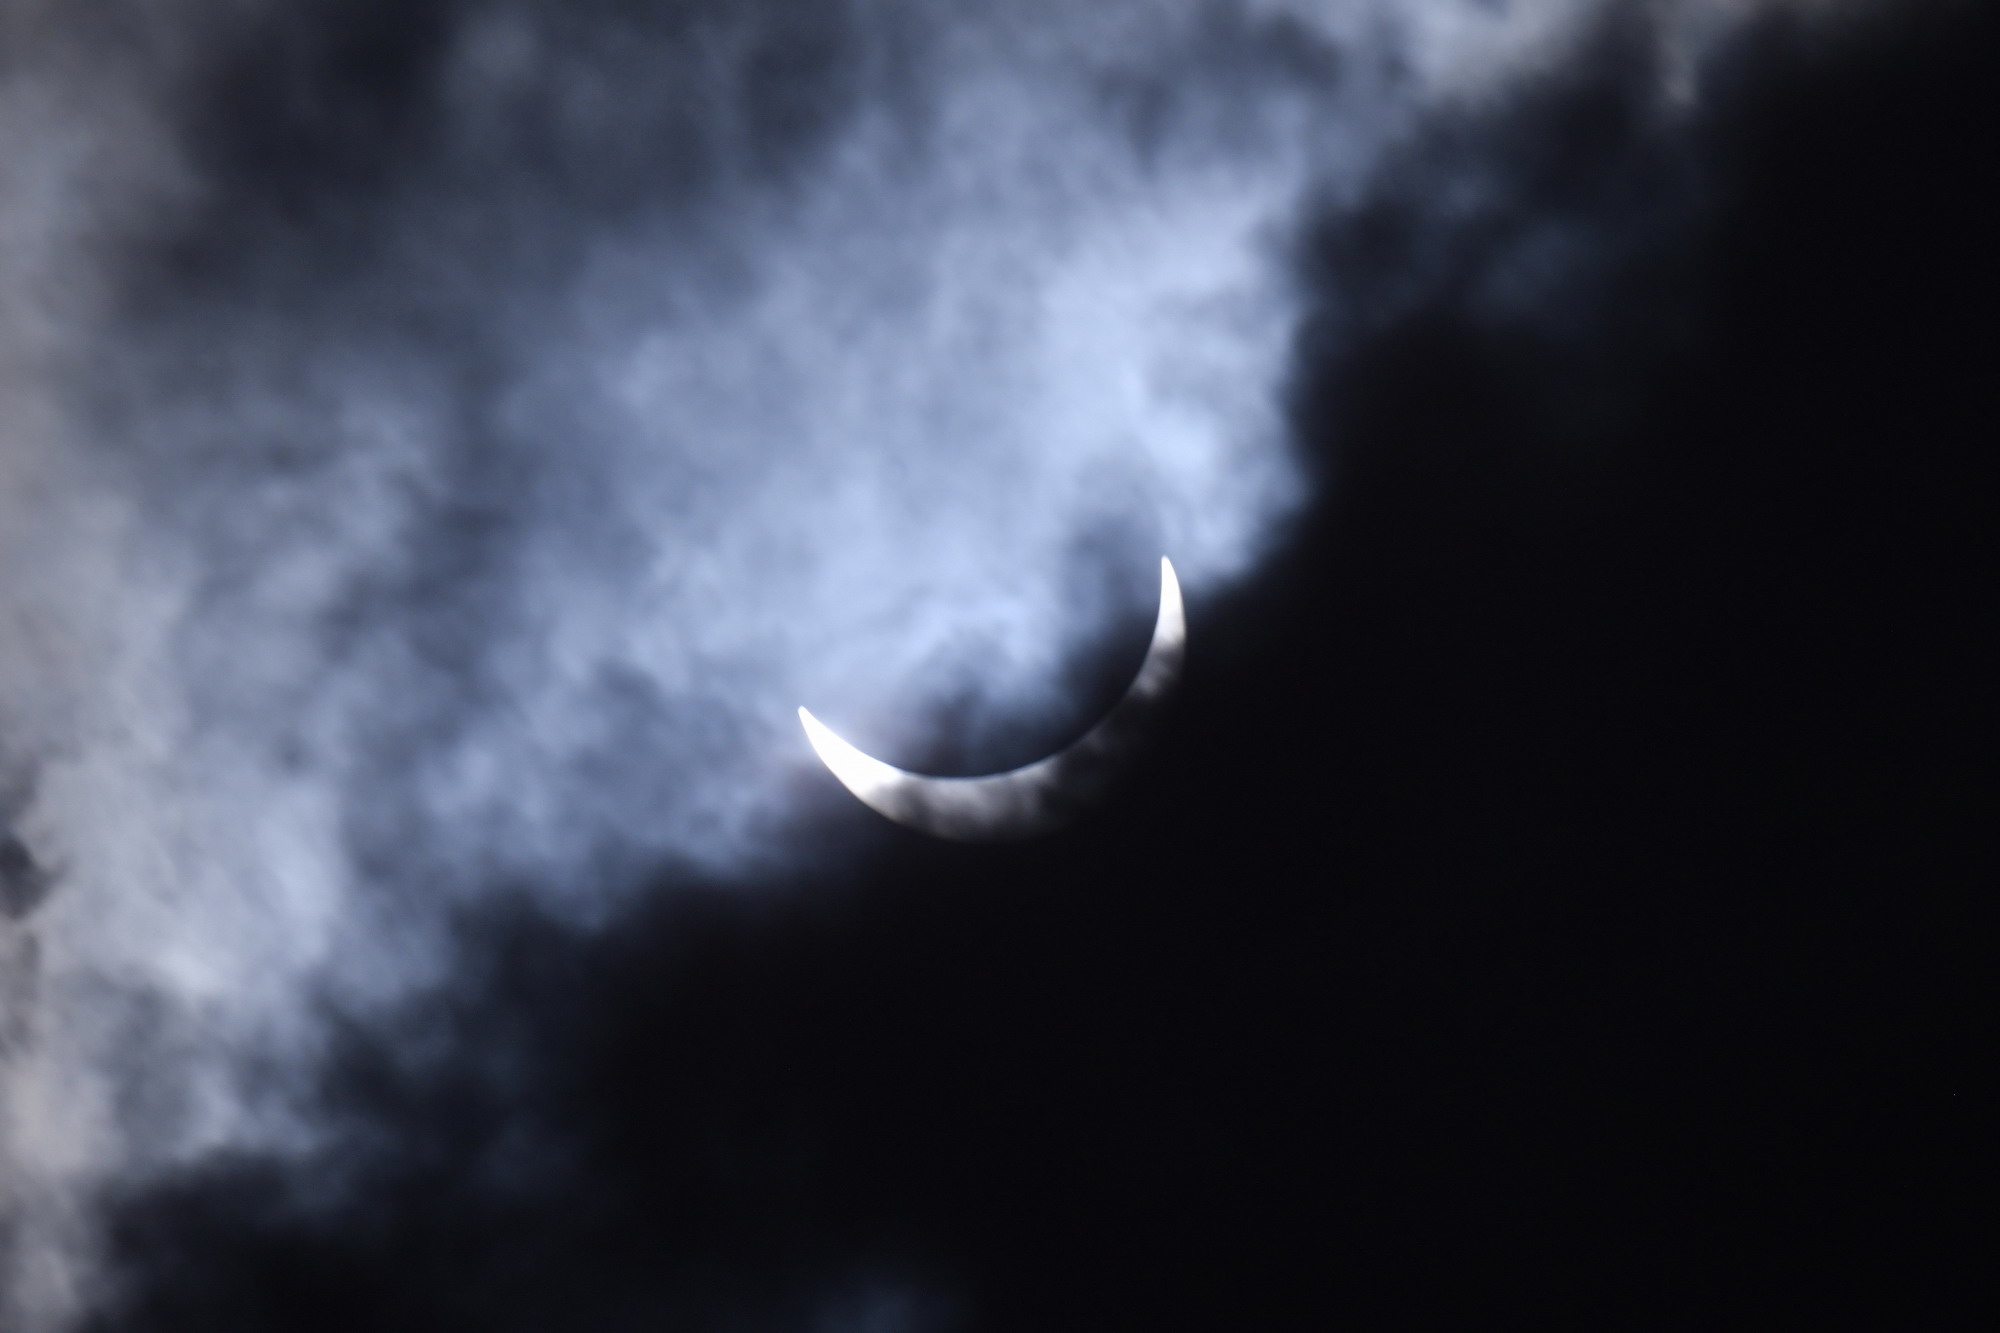 By 3:30 pm, the moon had transited the sun, and was entering the final phase of the eclipse. The clouds added a beautifully eerie tone to the image